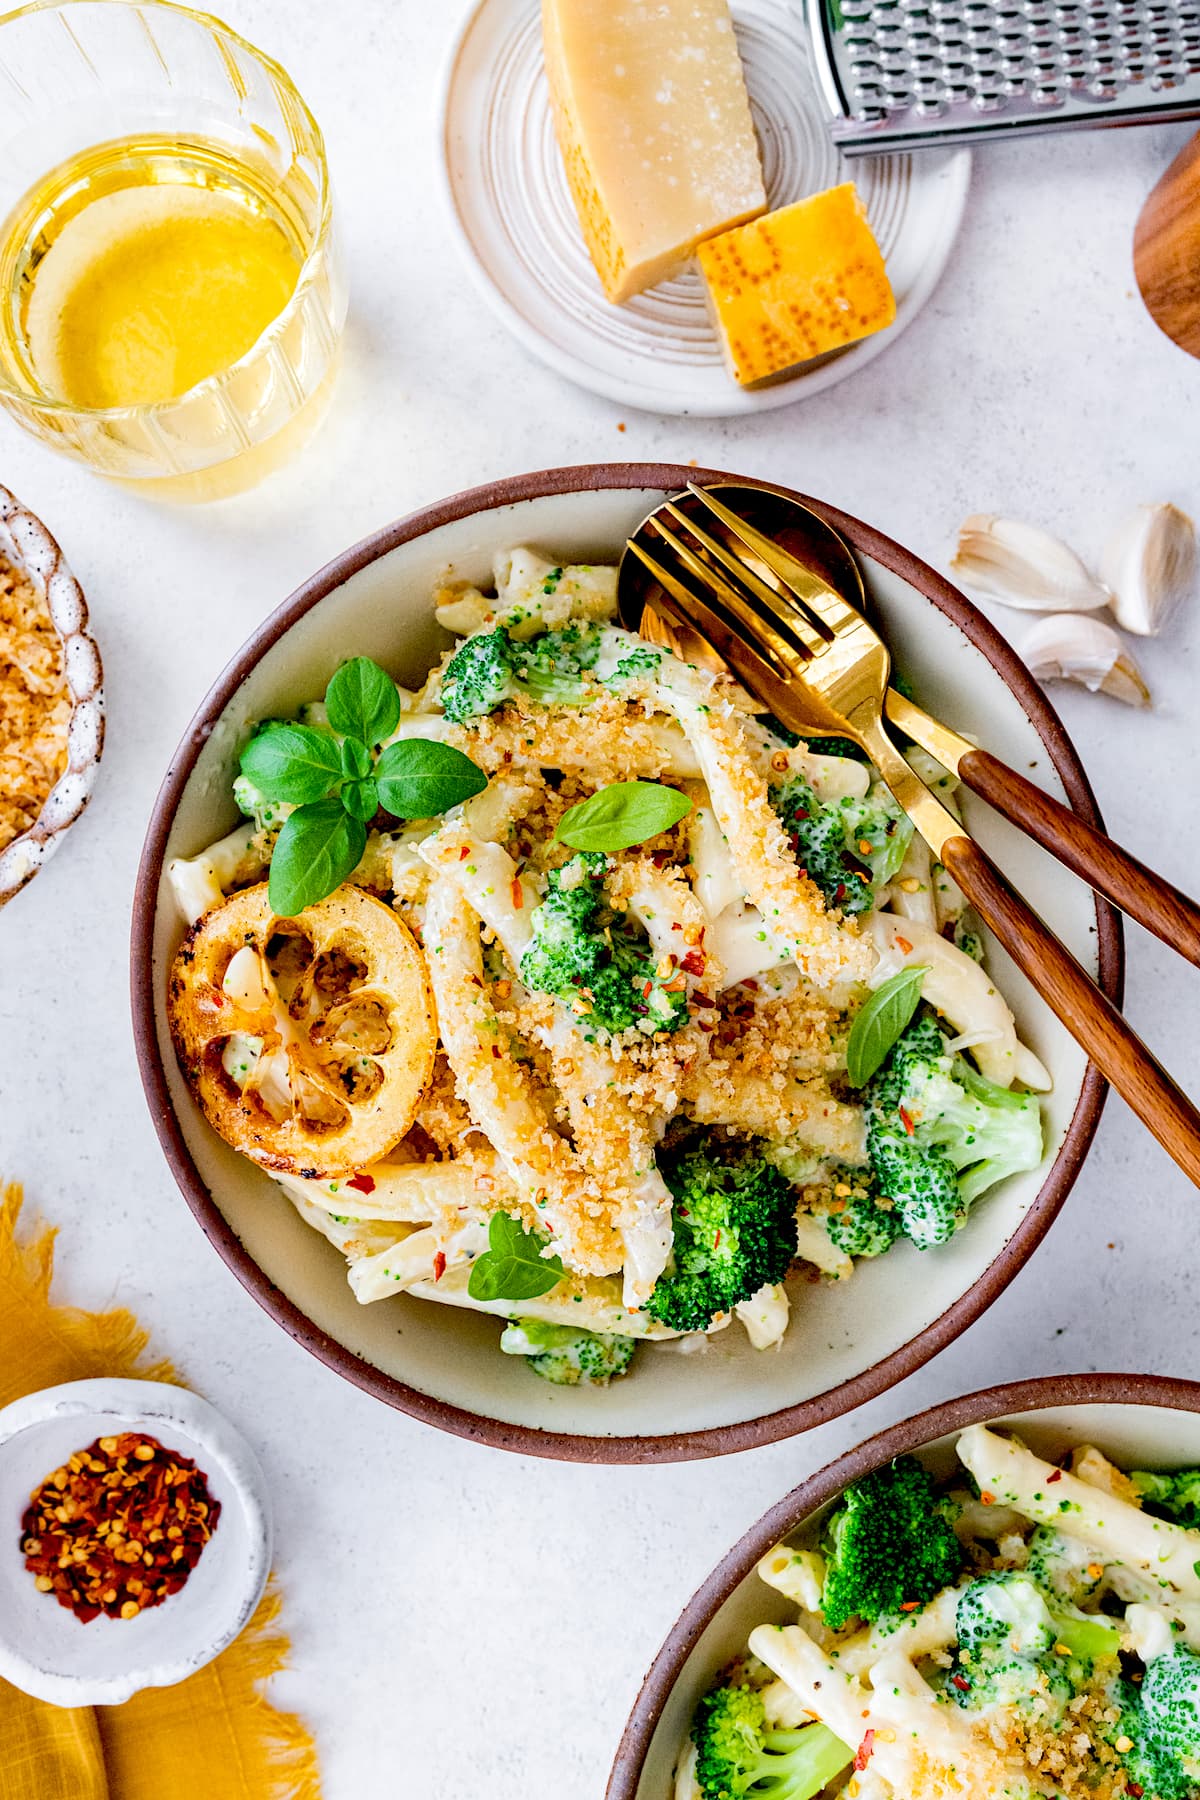 creamy broccoli pasta in bowl with toasted breadcrumbs, lemon slice, and silverware.